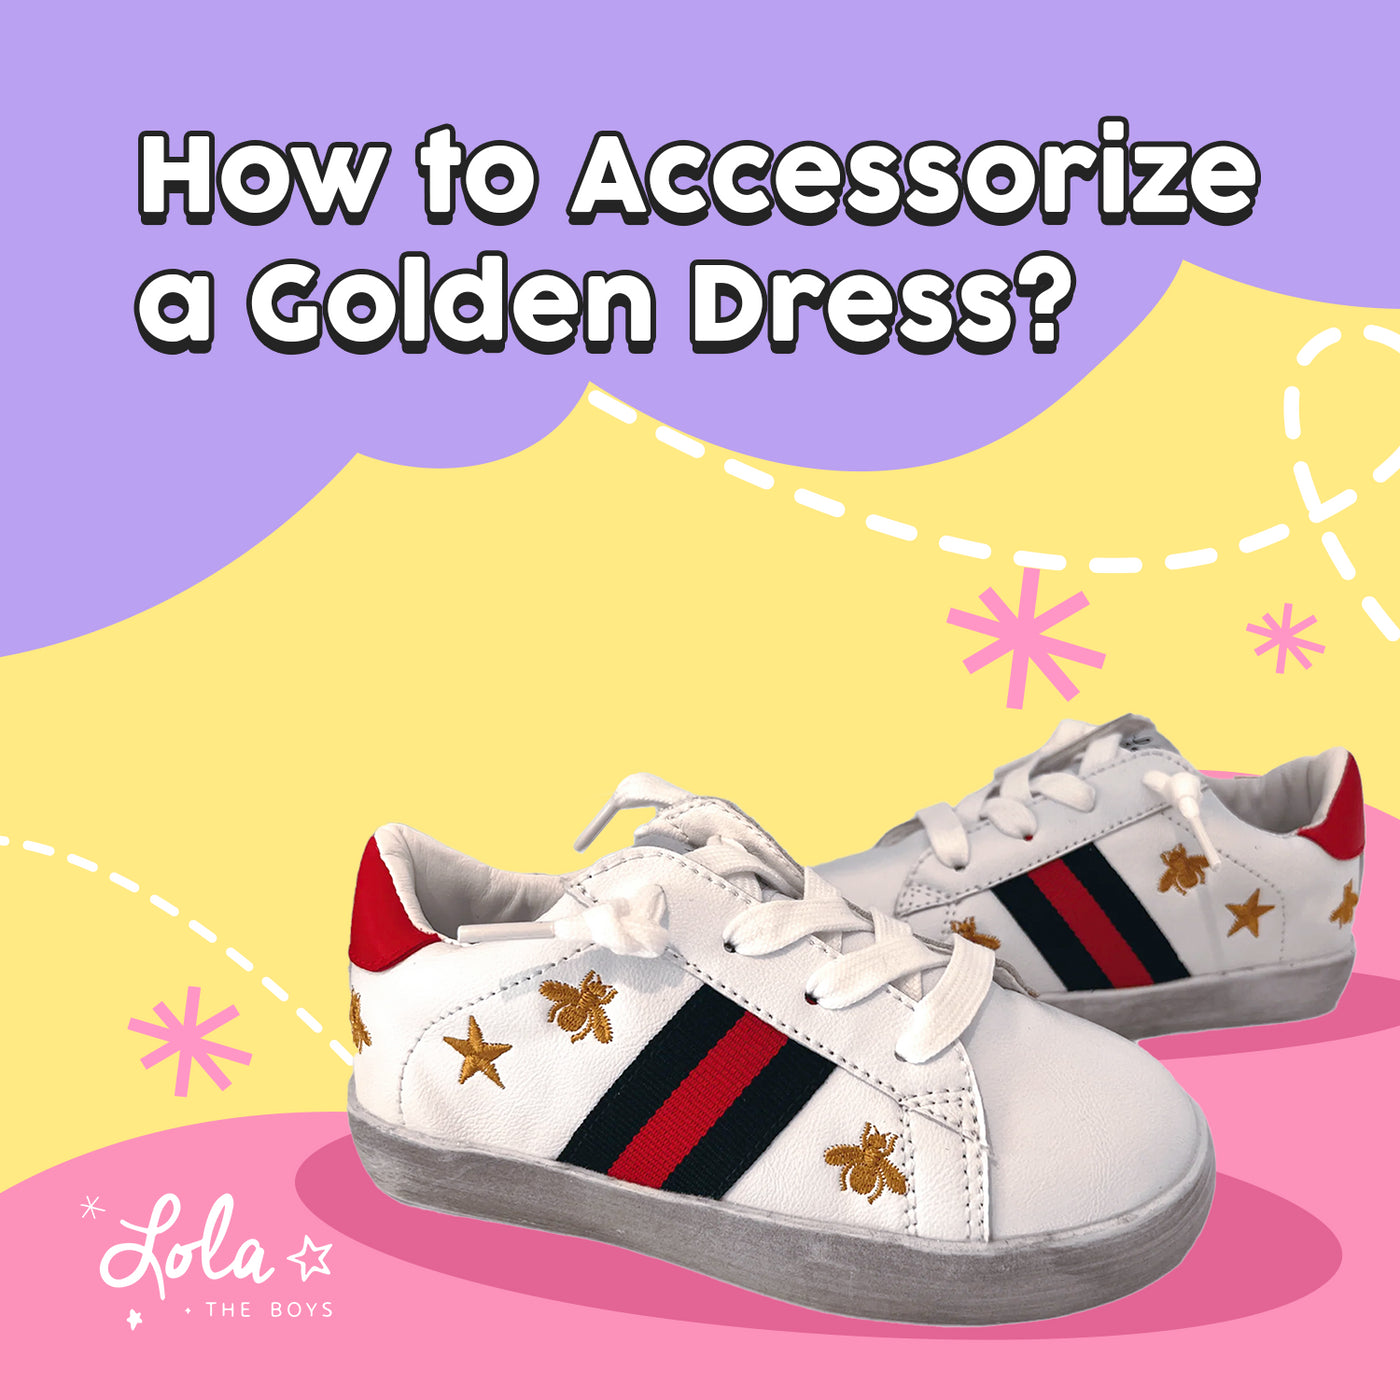 How to Accessorize a Golden Dress?